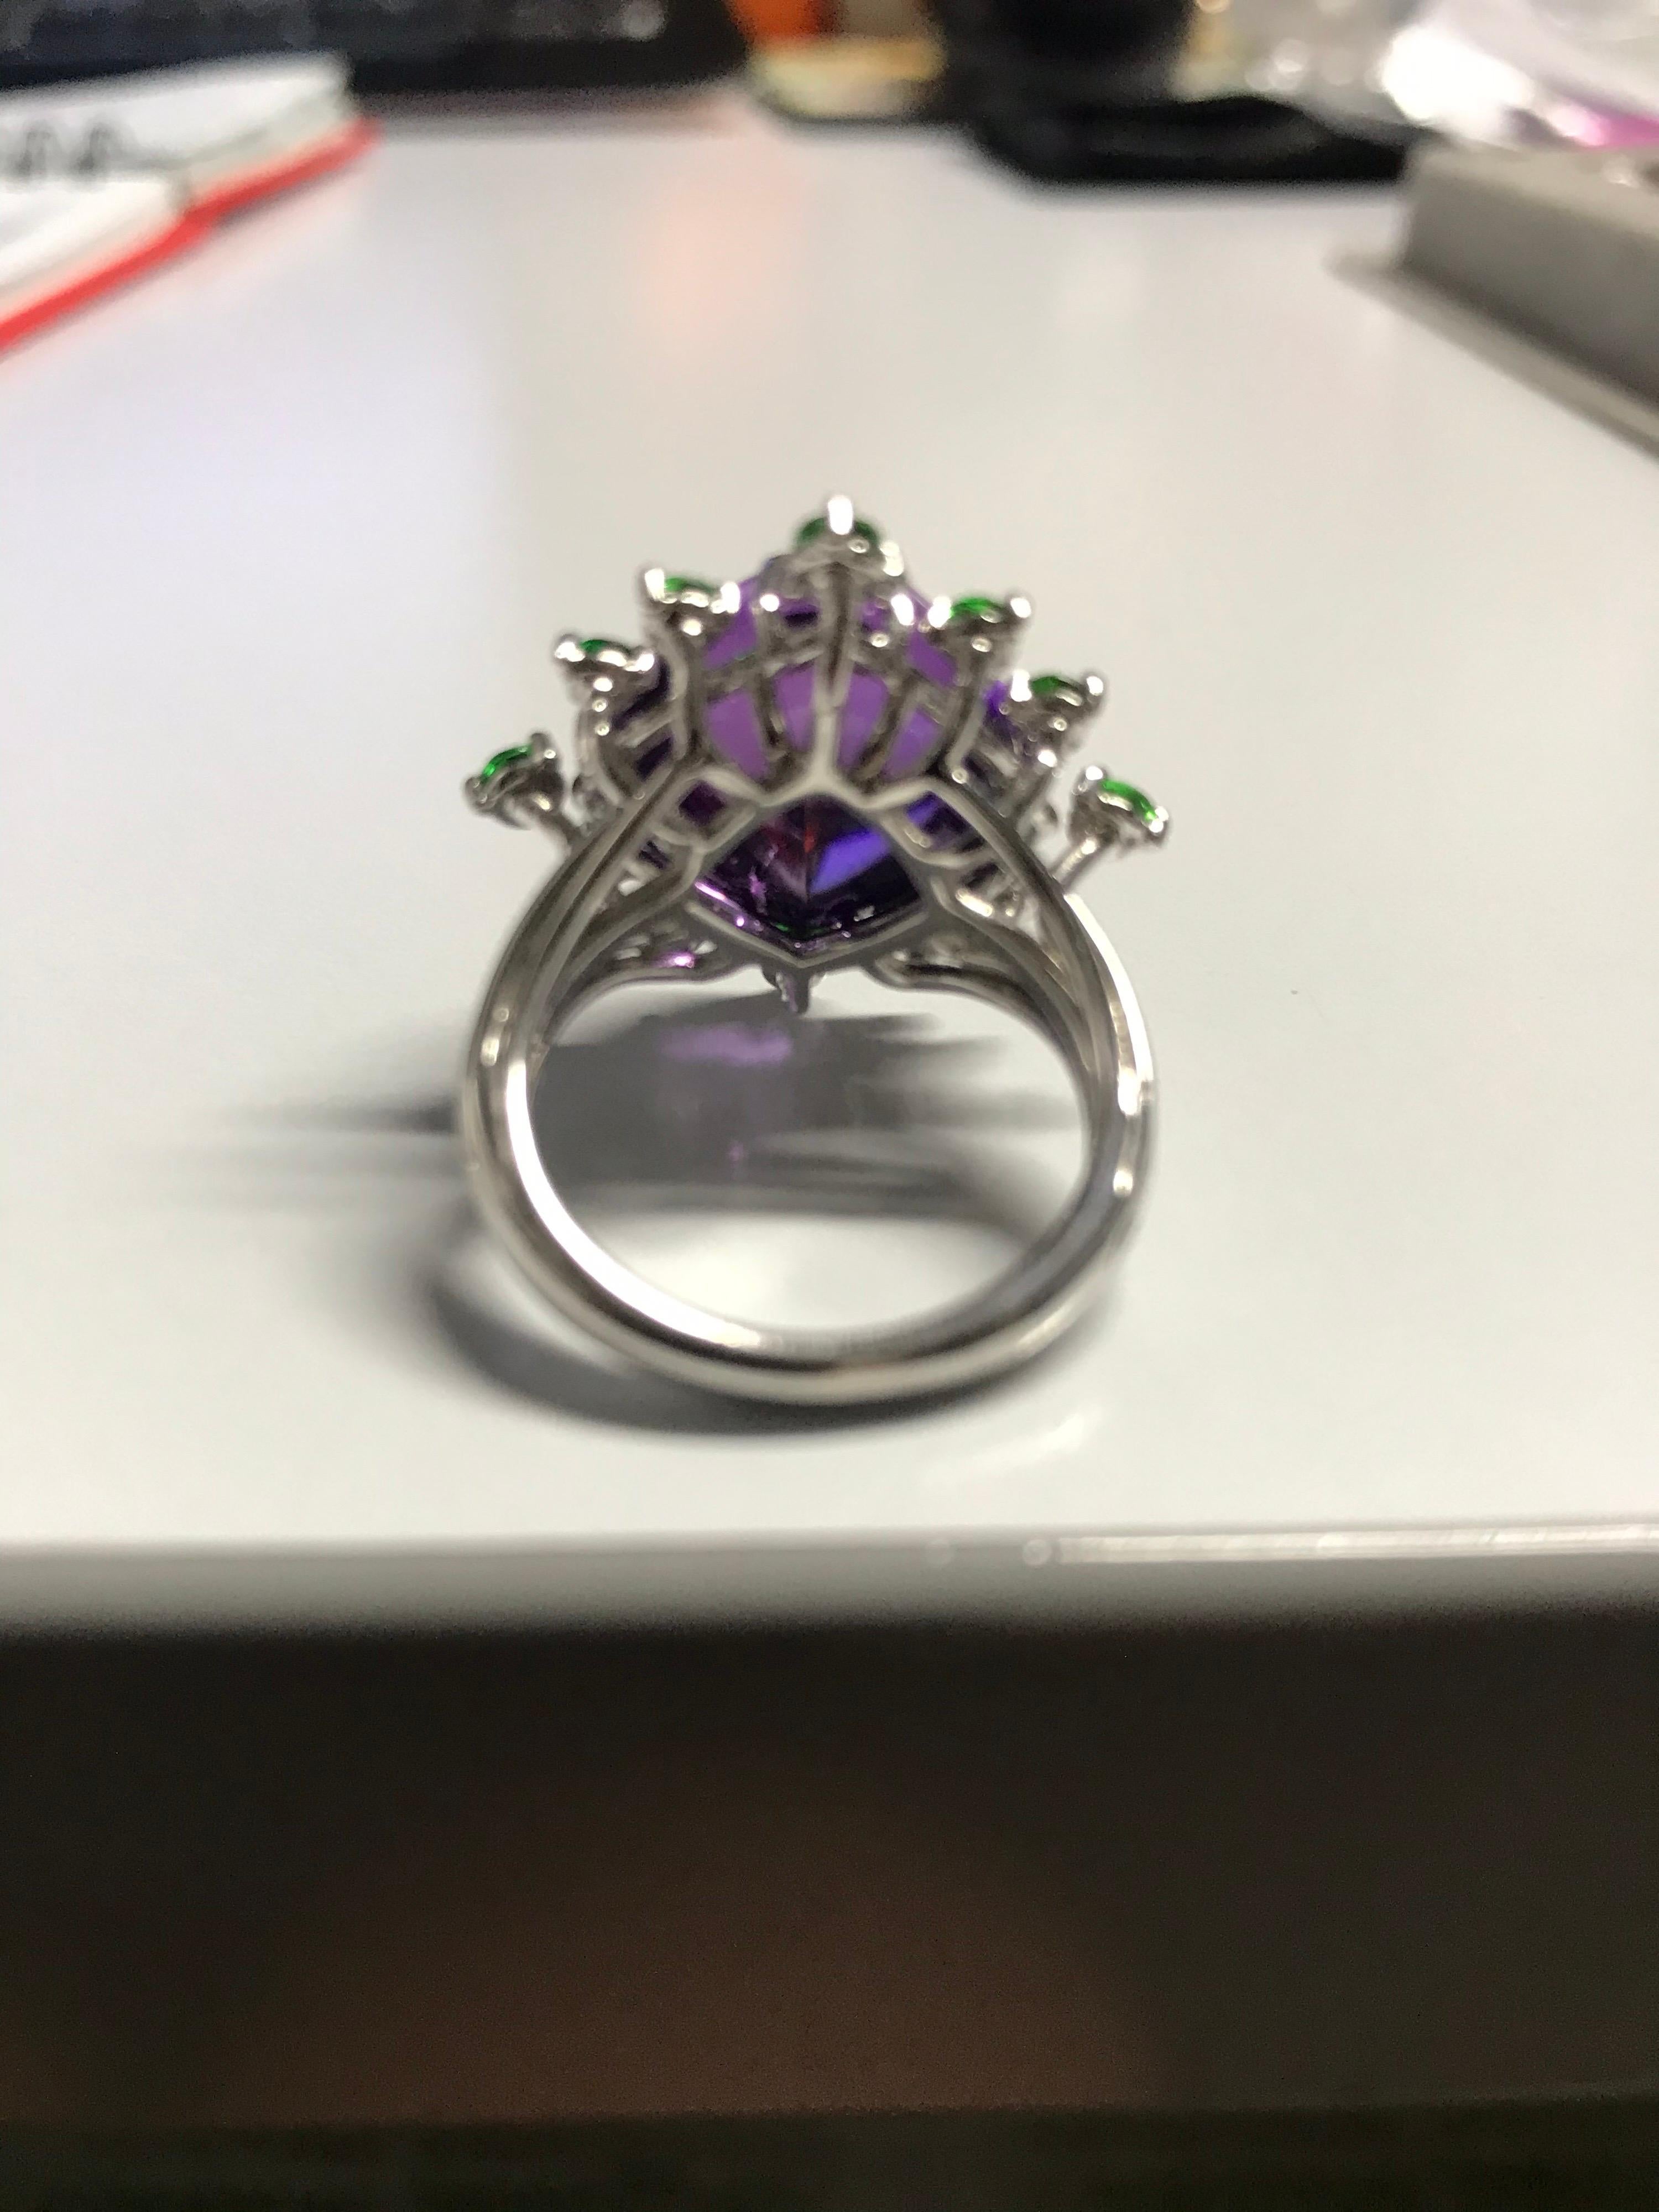 Handcrafted in Margherita Burgener family workshop, based in Valenza,  Italy, in 18KT white gold, the ring is centering the February birthstone Amethyst in a original sugar loaf cut.

18KT white gold grams 7.03
n. 1 Amethyst  ct 13.98 
n. 12